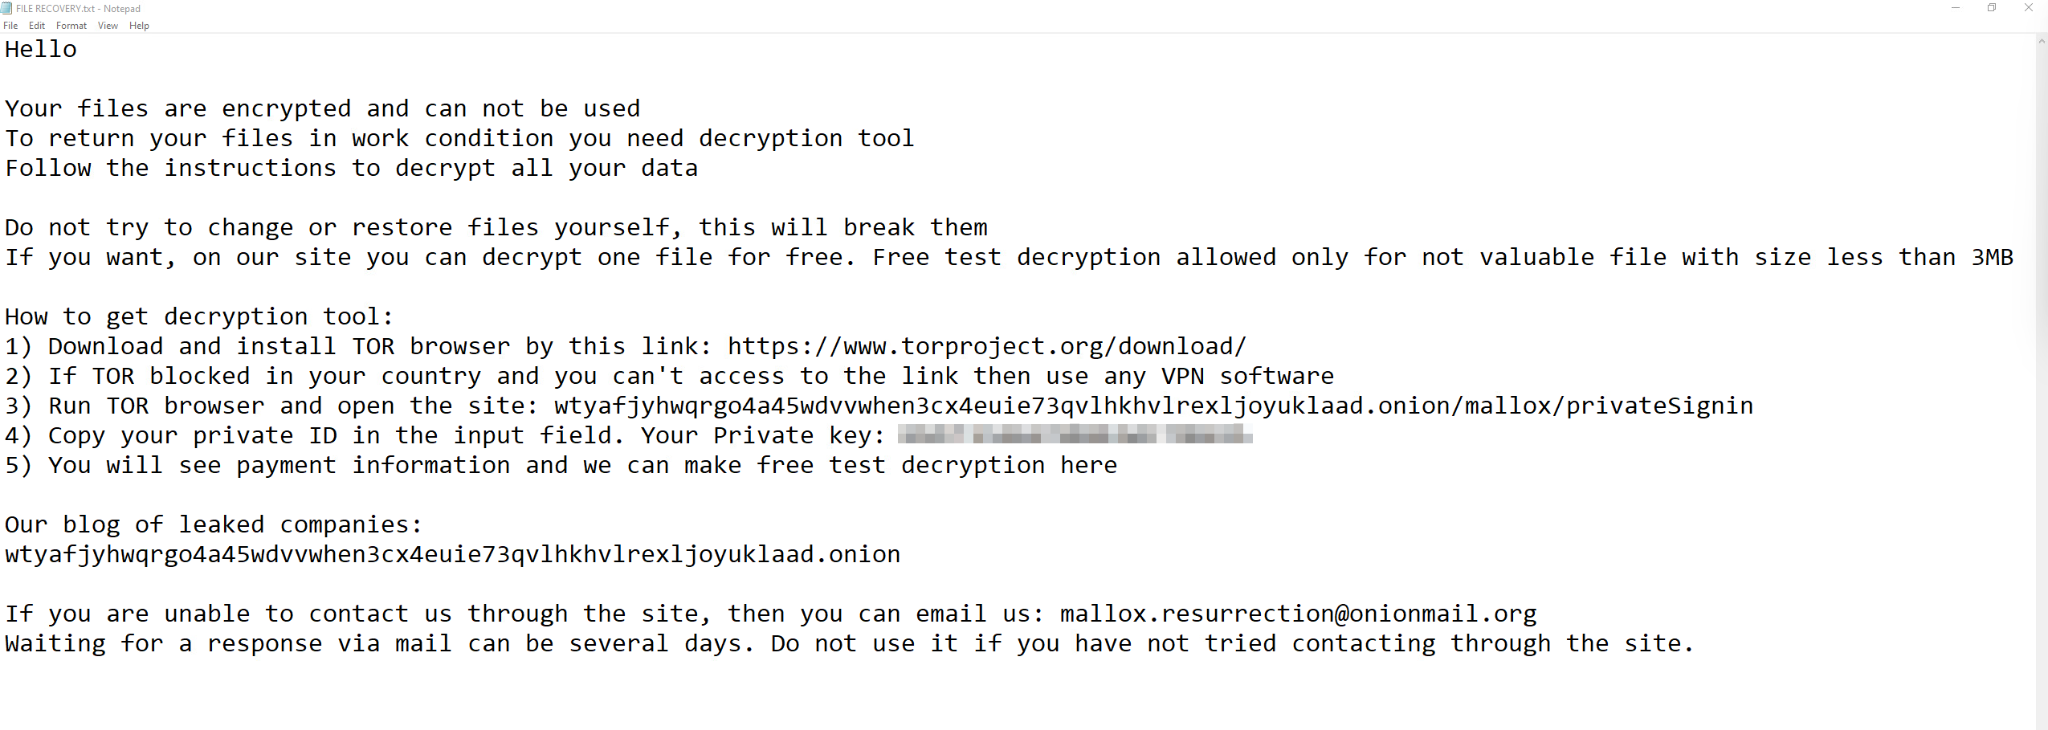 Image 10 is an example Mallox ransomware note. Hello, your files are encrypted and cannot be used. To return your files in work condition you need decryption tool. Follow the instructions to decrypt all your data. Do not try to change or restore files yourself, this will break them. If you want, on our site, you can decrypt one file for free. Free test decryption allowed only for not valuable file with size less than 3MB. How to get decryption tool: 1. Download and install Tor browser by this link [Tor link]. 2: If Tor blocked in your country and you can't access to the link use any VPN software. 3. Run Tor browser and open the site. 4. Copy your private ID in the input field. Your private key (this portion is blurred). 5. You will see payment information and we can make free test decryption here. Our blog of leaked companies [this is an Onion link]. If you are unable to contact us through the site, then you can email us: [this is an email at onionmail[.]org.] If you are unable to contact us through the site, waiting for a response via email can be several days. Do not use it if you have not tried contacting through the site.